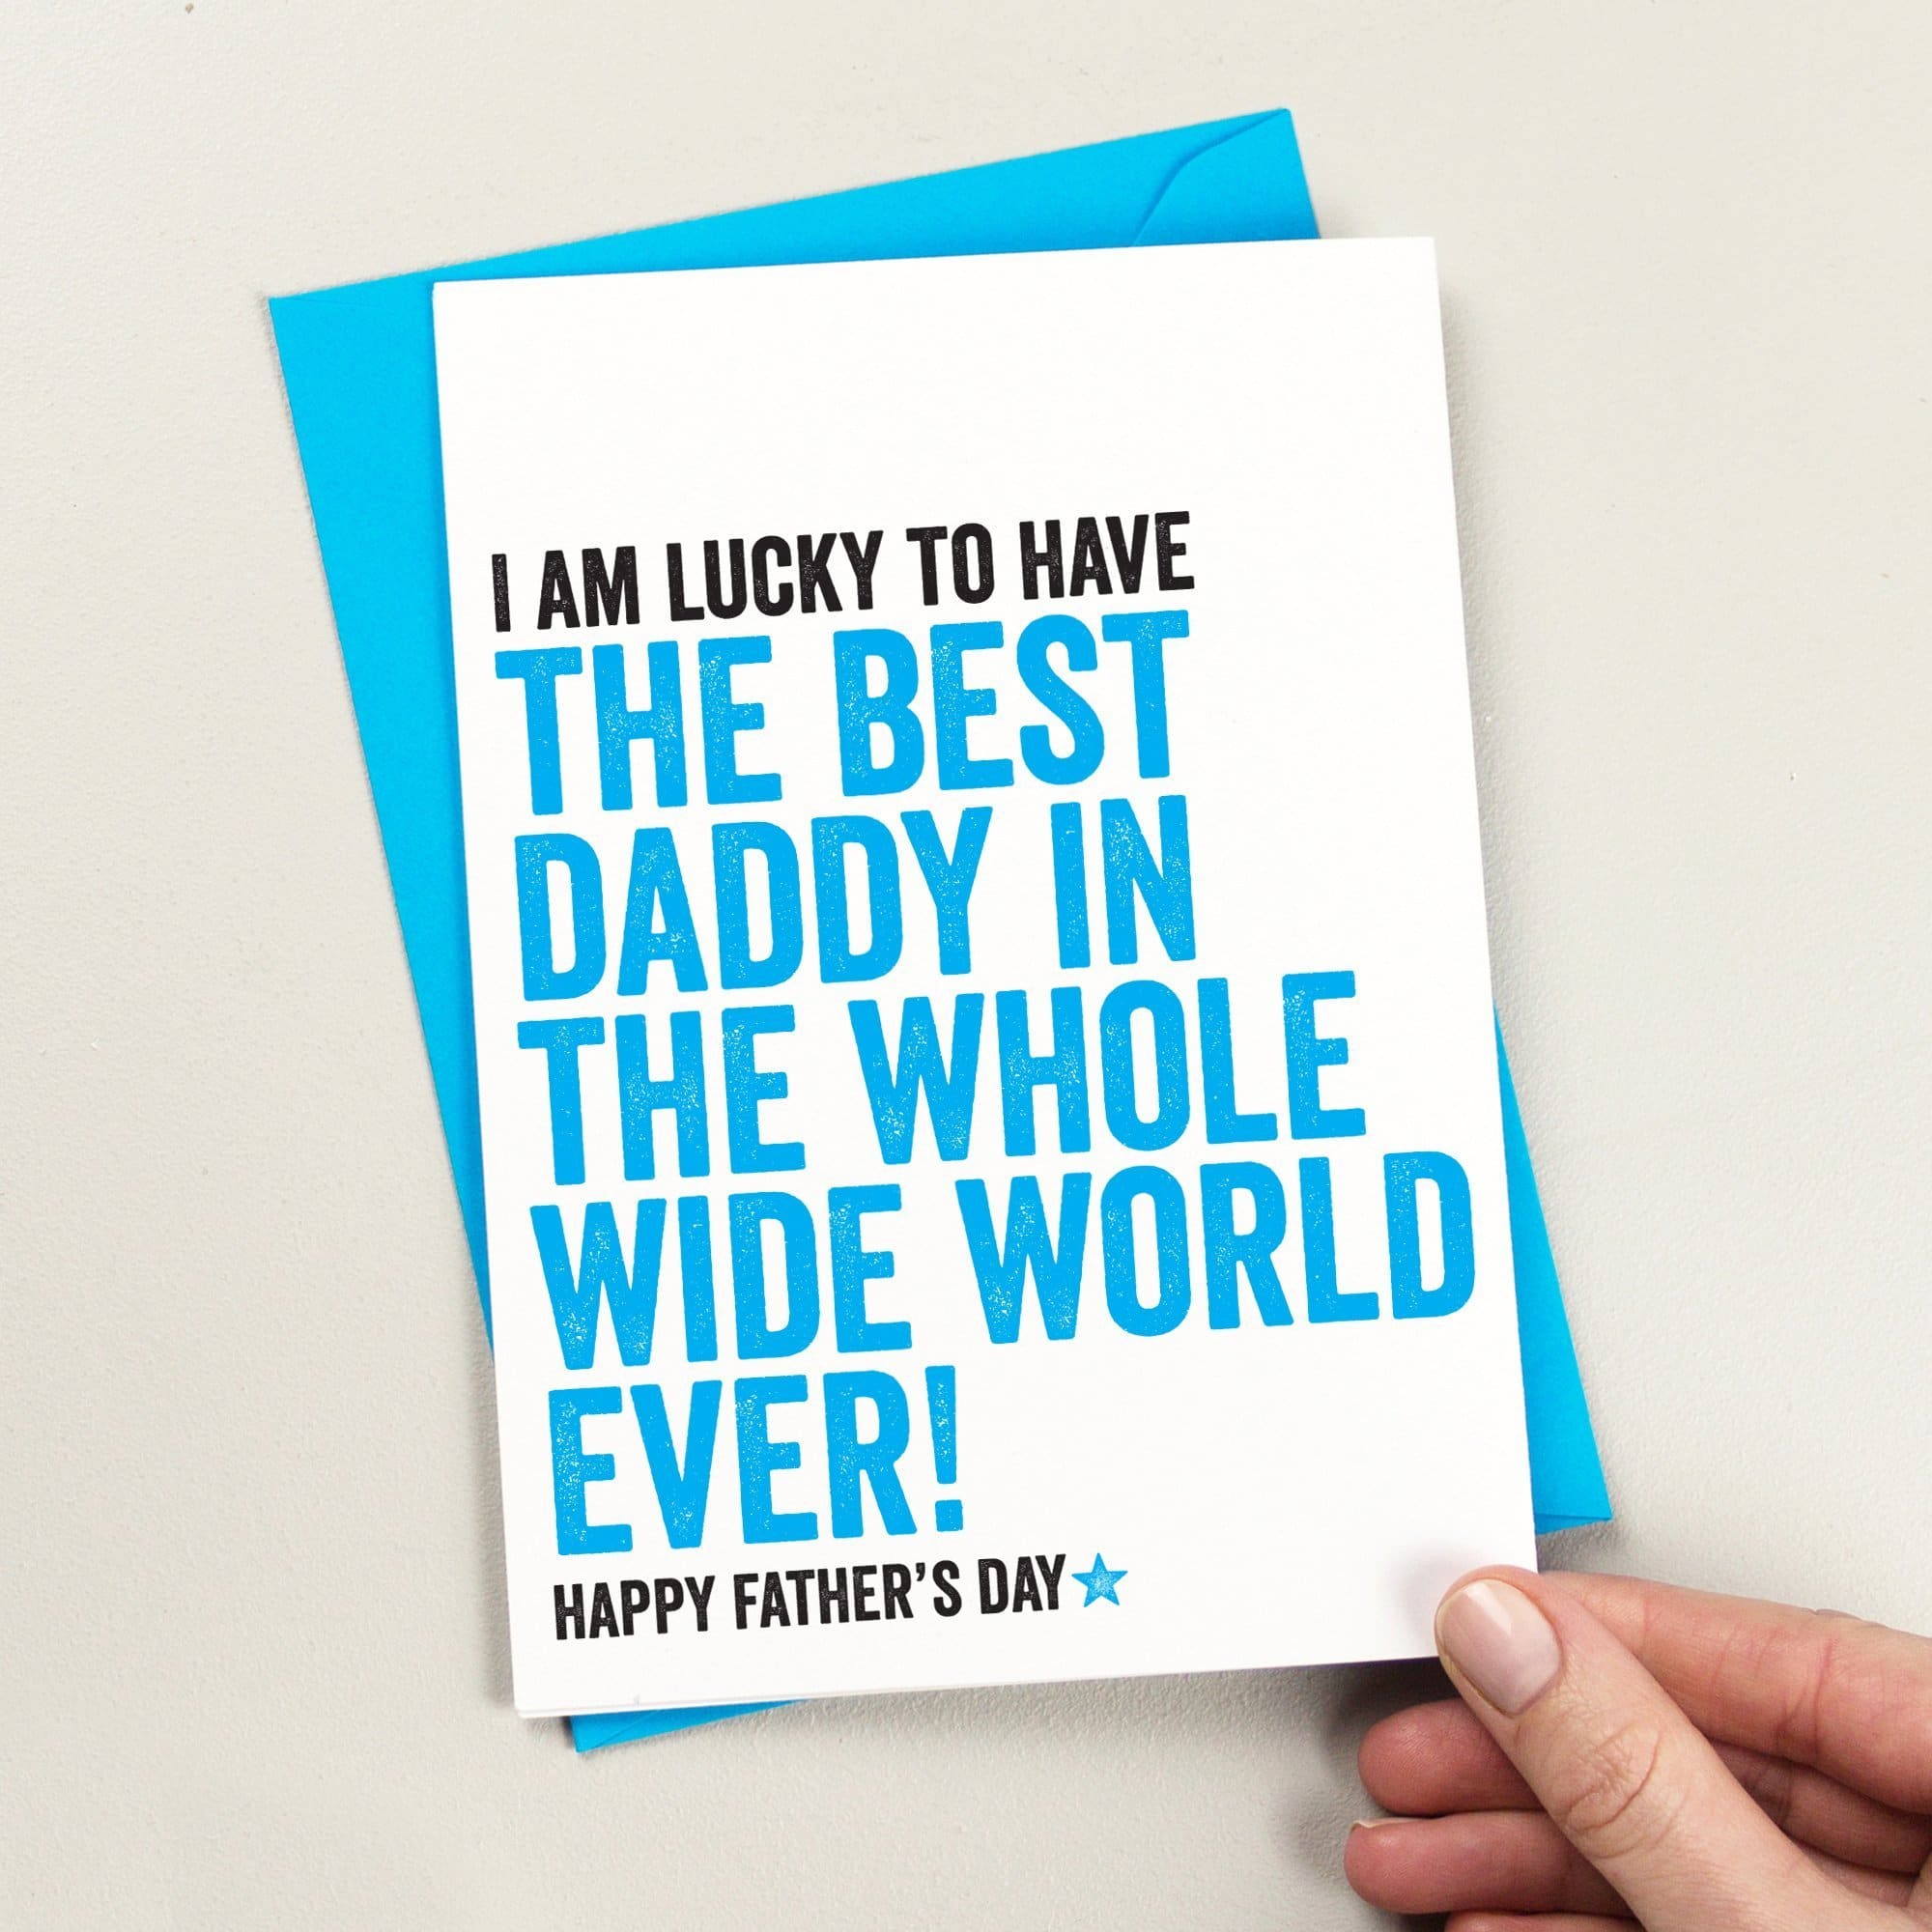 Fathers Day Greetings images 2020